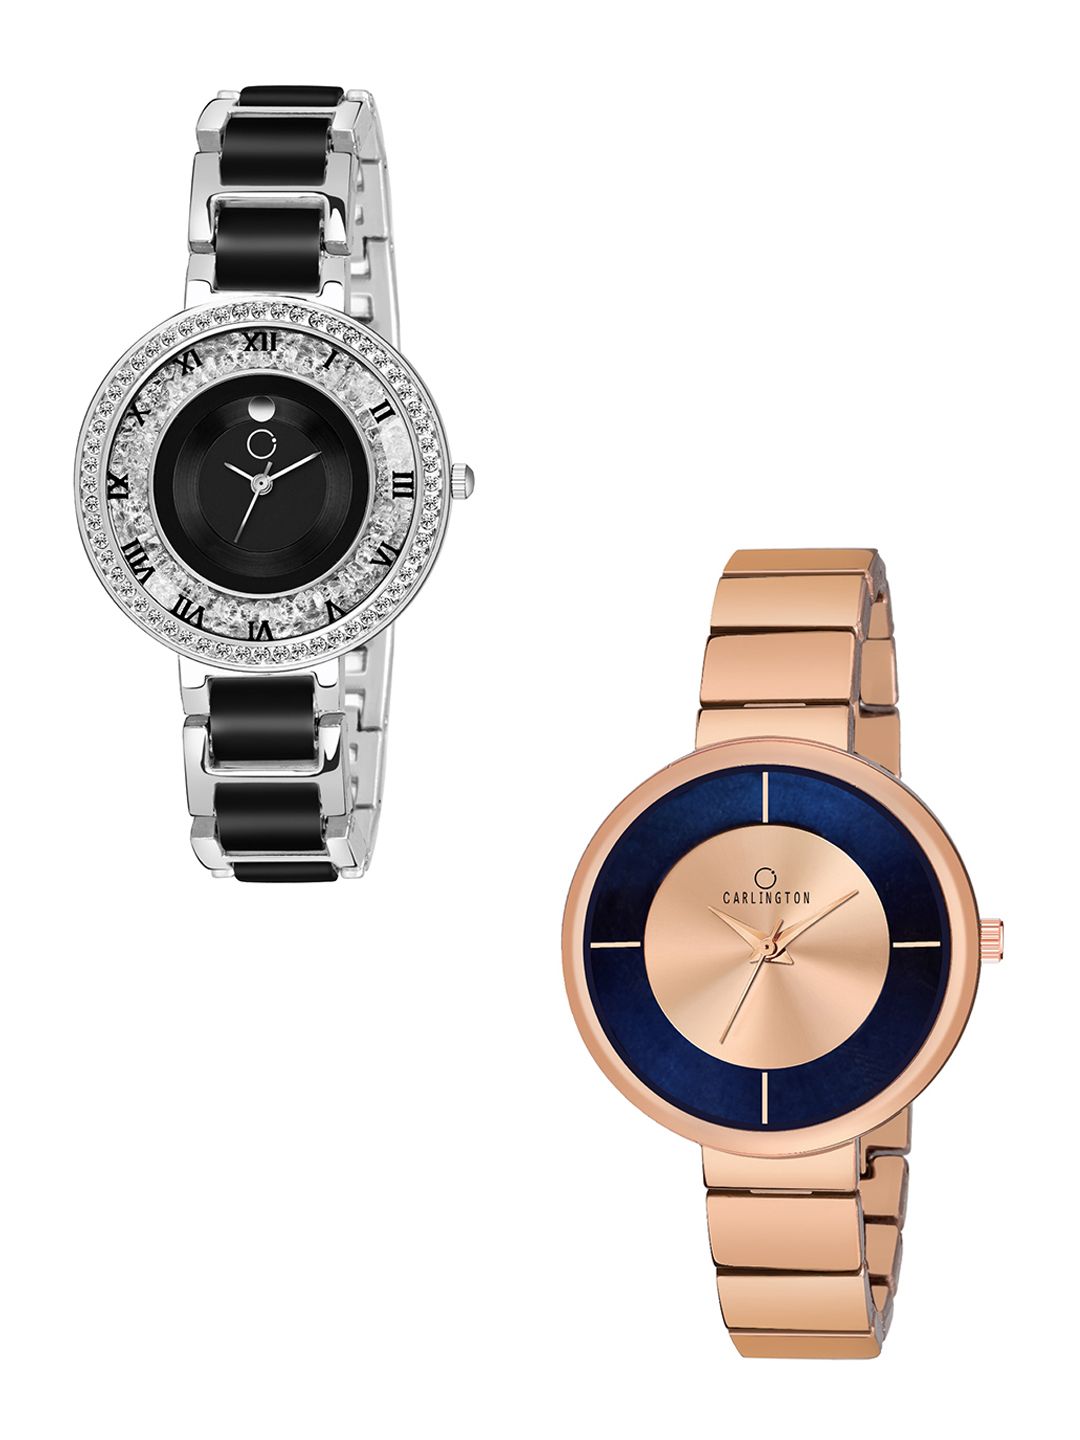 CARLINGTON Women Steel & Gold-Toned Analogue Watch Combo Price in India